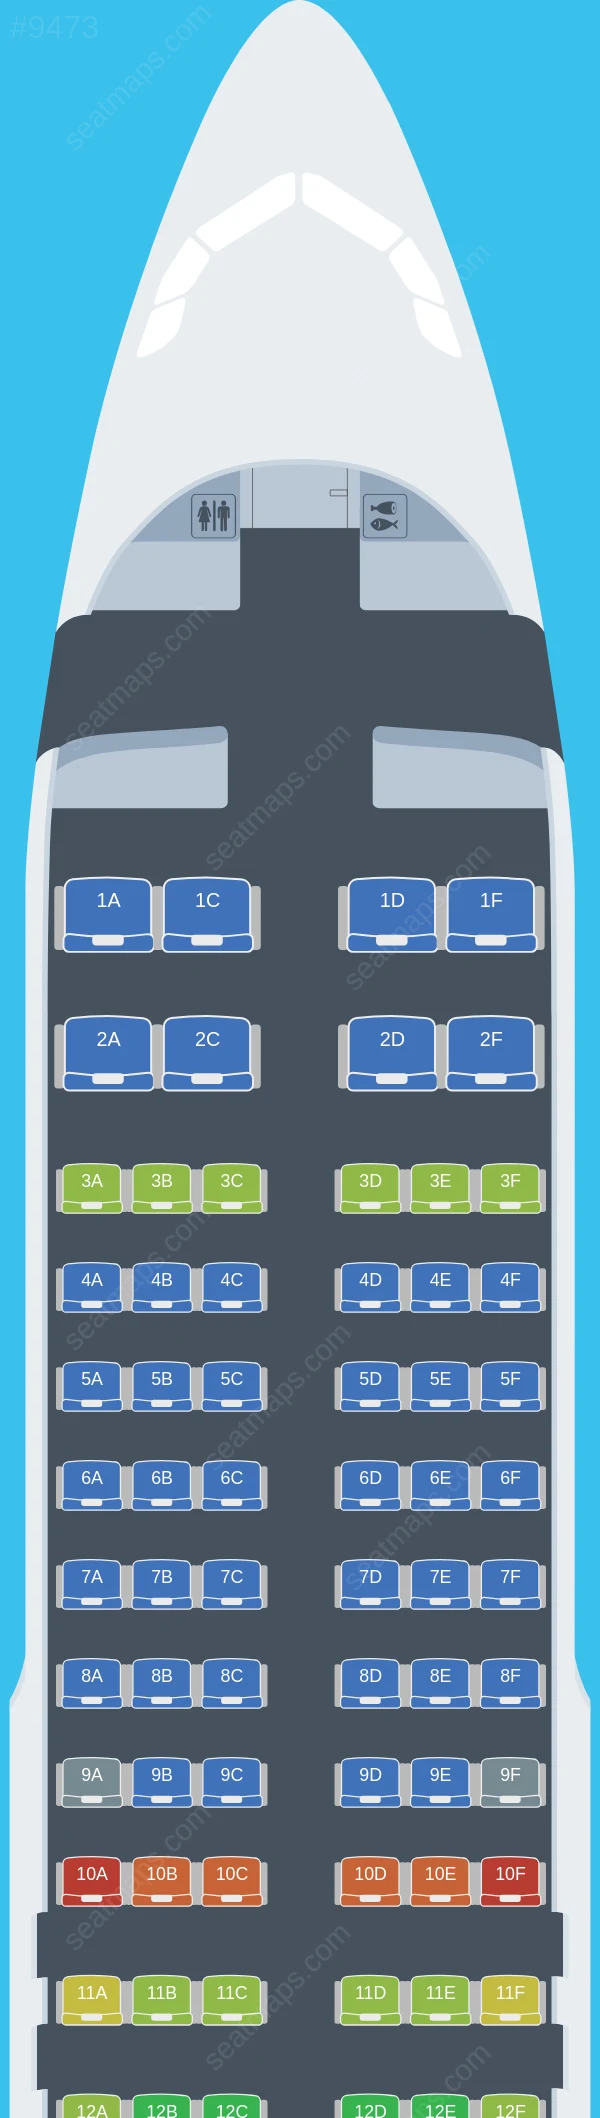 Bamboo Airways Airbus A320-200 V.1 seatmap preview